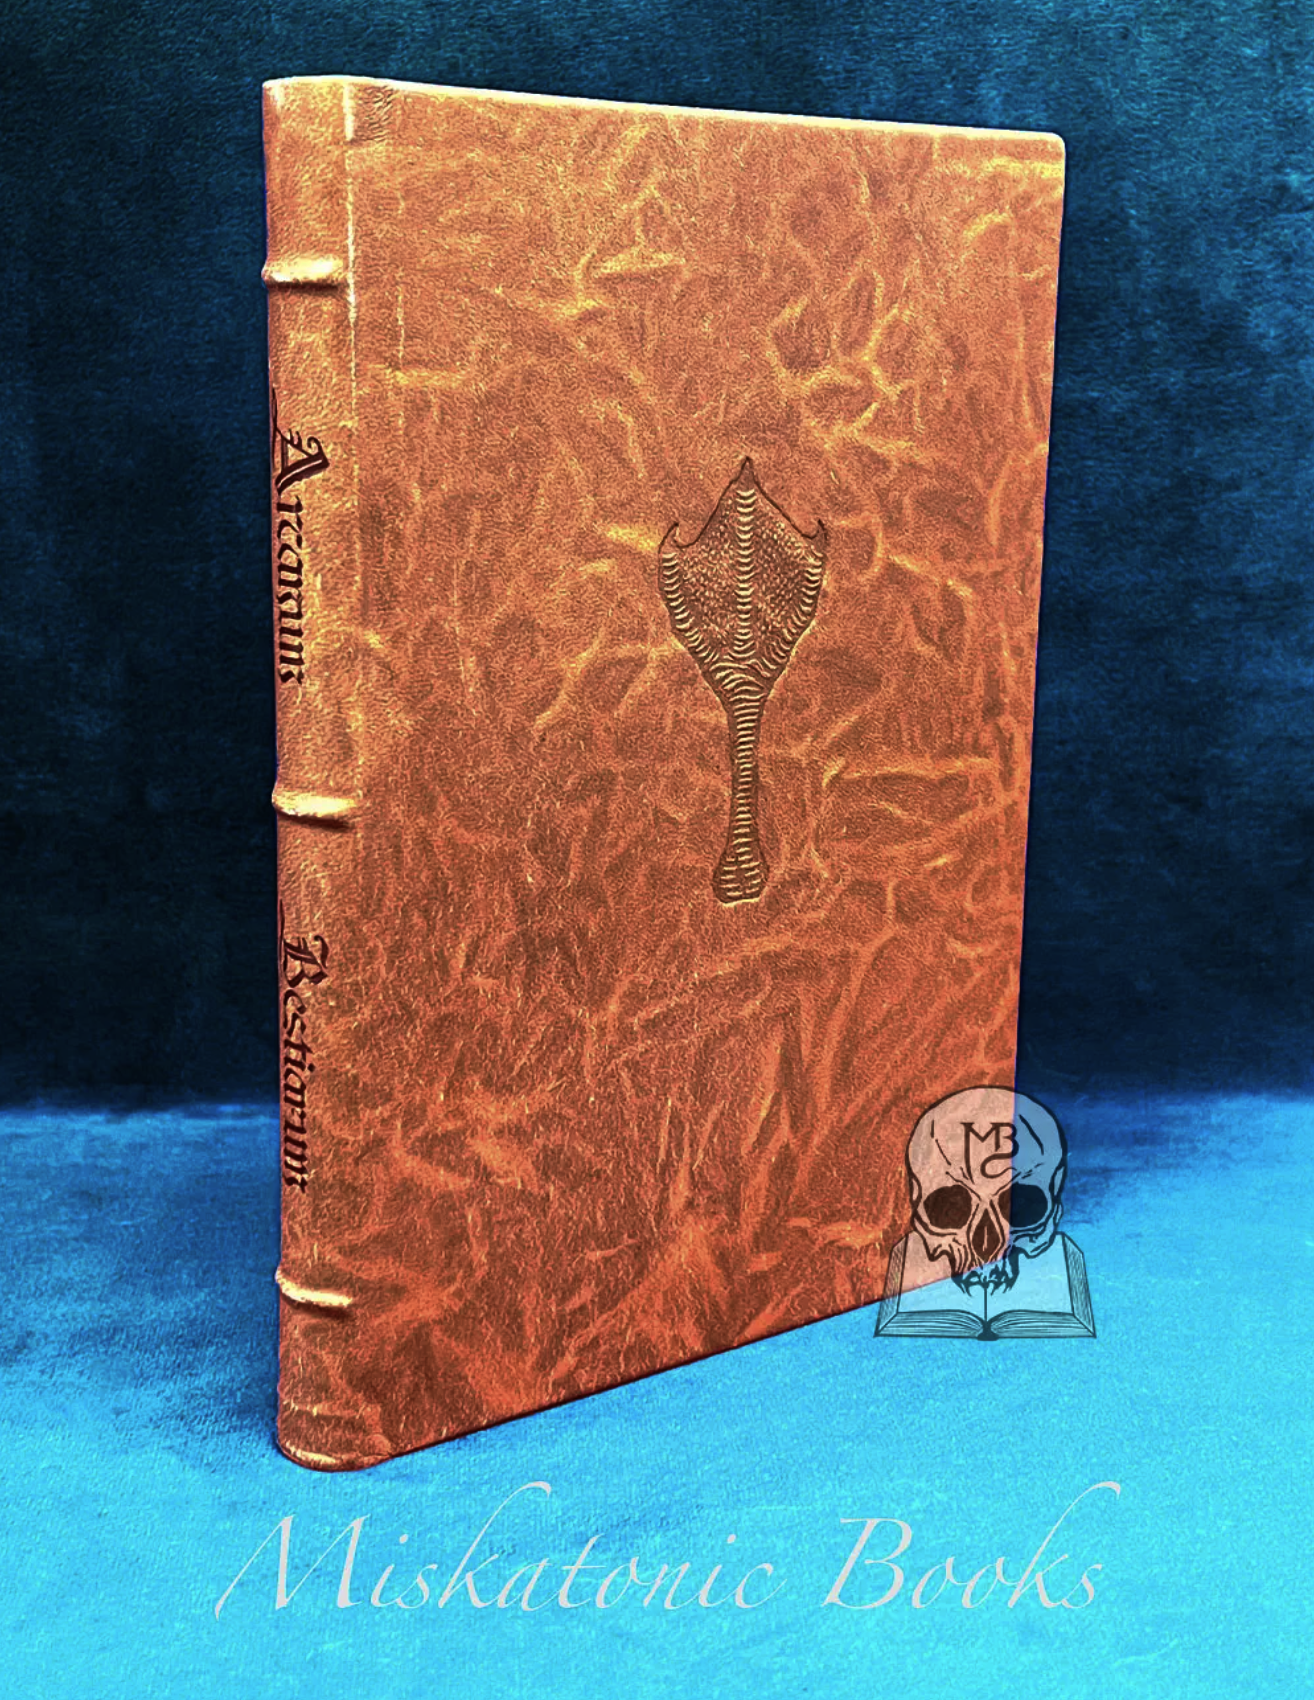 ARCANUM BESTIARUM: Of The Subtil and Occult Virtues of Divers Beasts by Robert Fitzgerald - Deluxe Antique Skiver Leather with Signed Art - This being #1 of 49 copies!